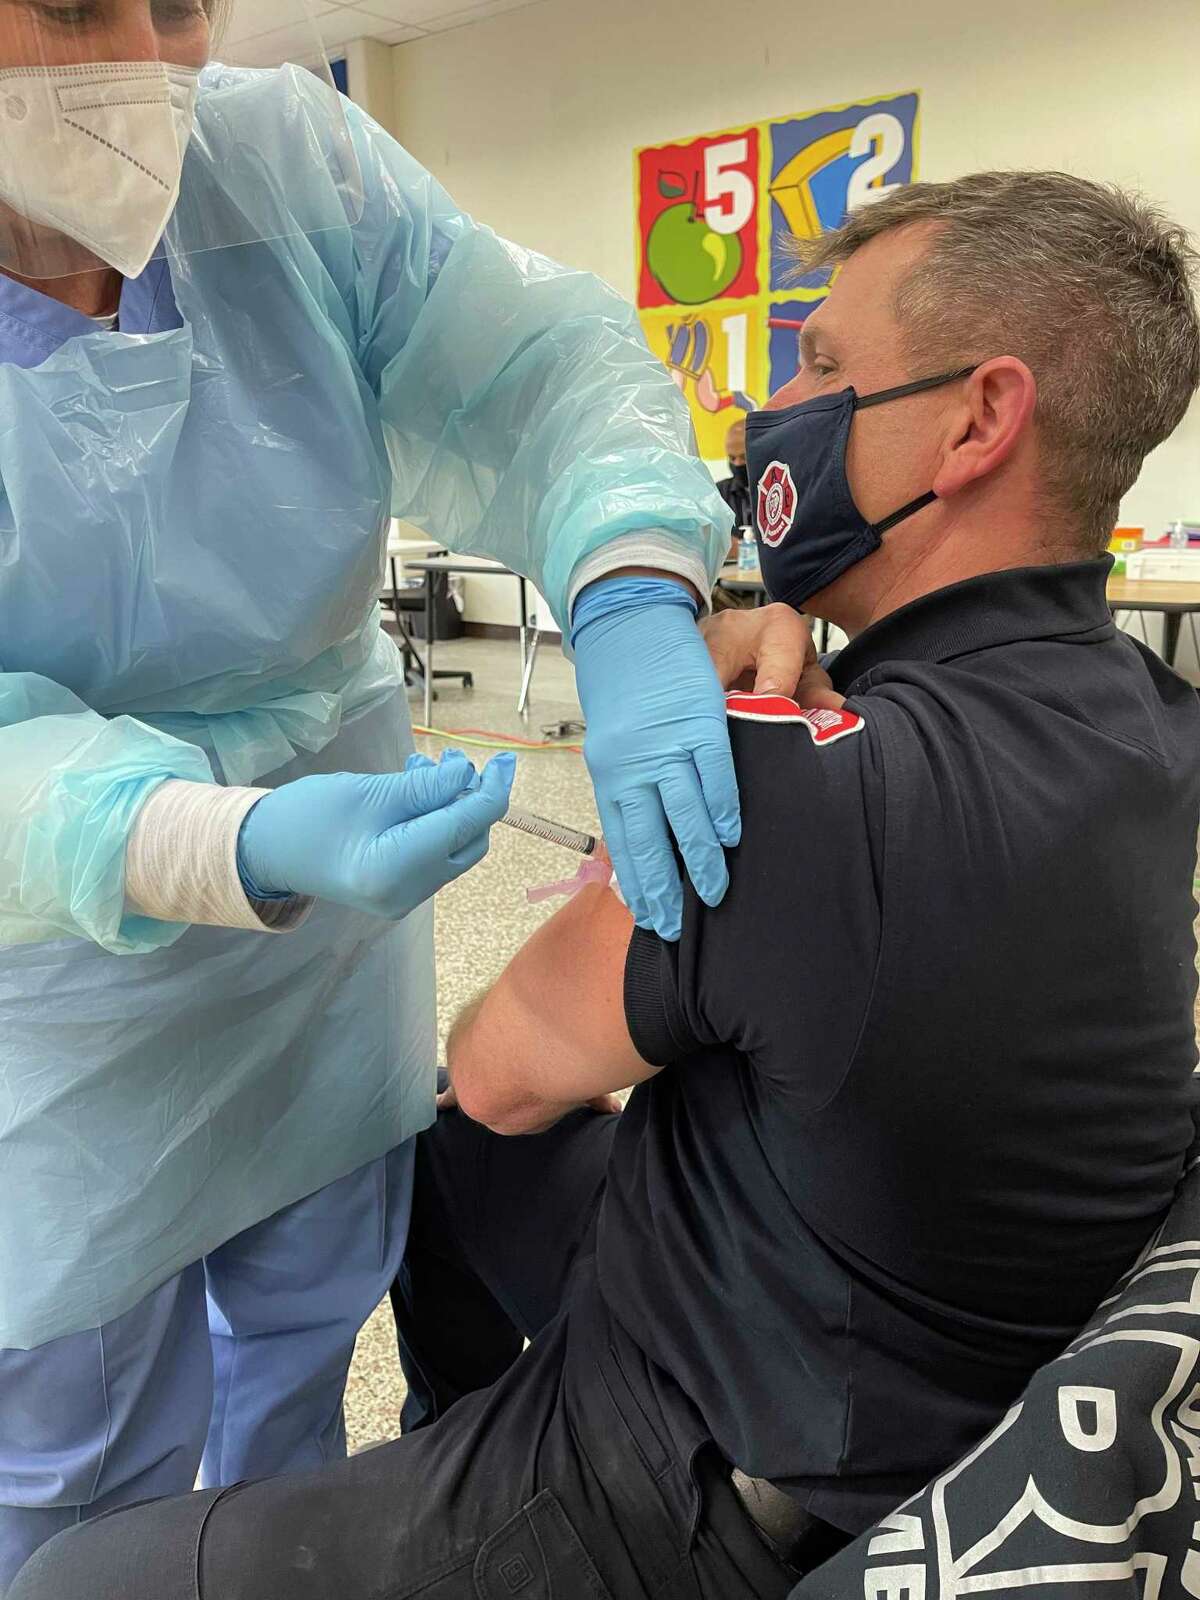 Nurse Maureen Singer administers the Moderna COVID vaccine to Danbury fire Lt. Mark Miguel on Wednesday, Dec 30, 2020. The Danbury Health Department administered 300 COVID vaccines over the course of a week to health care workers and first responders.